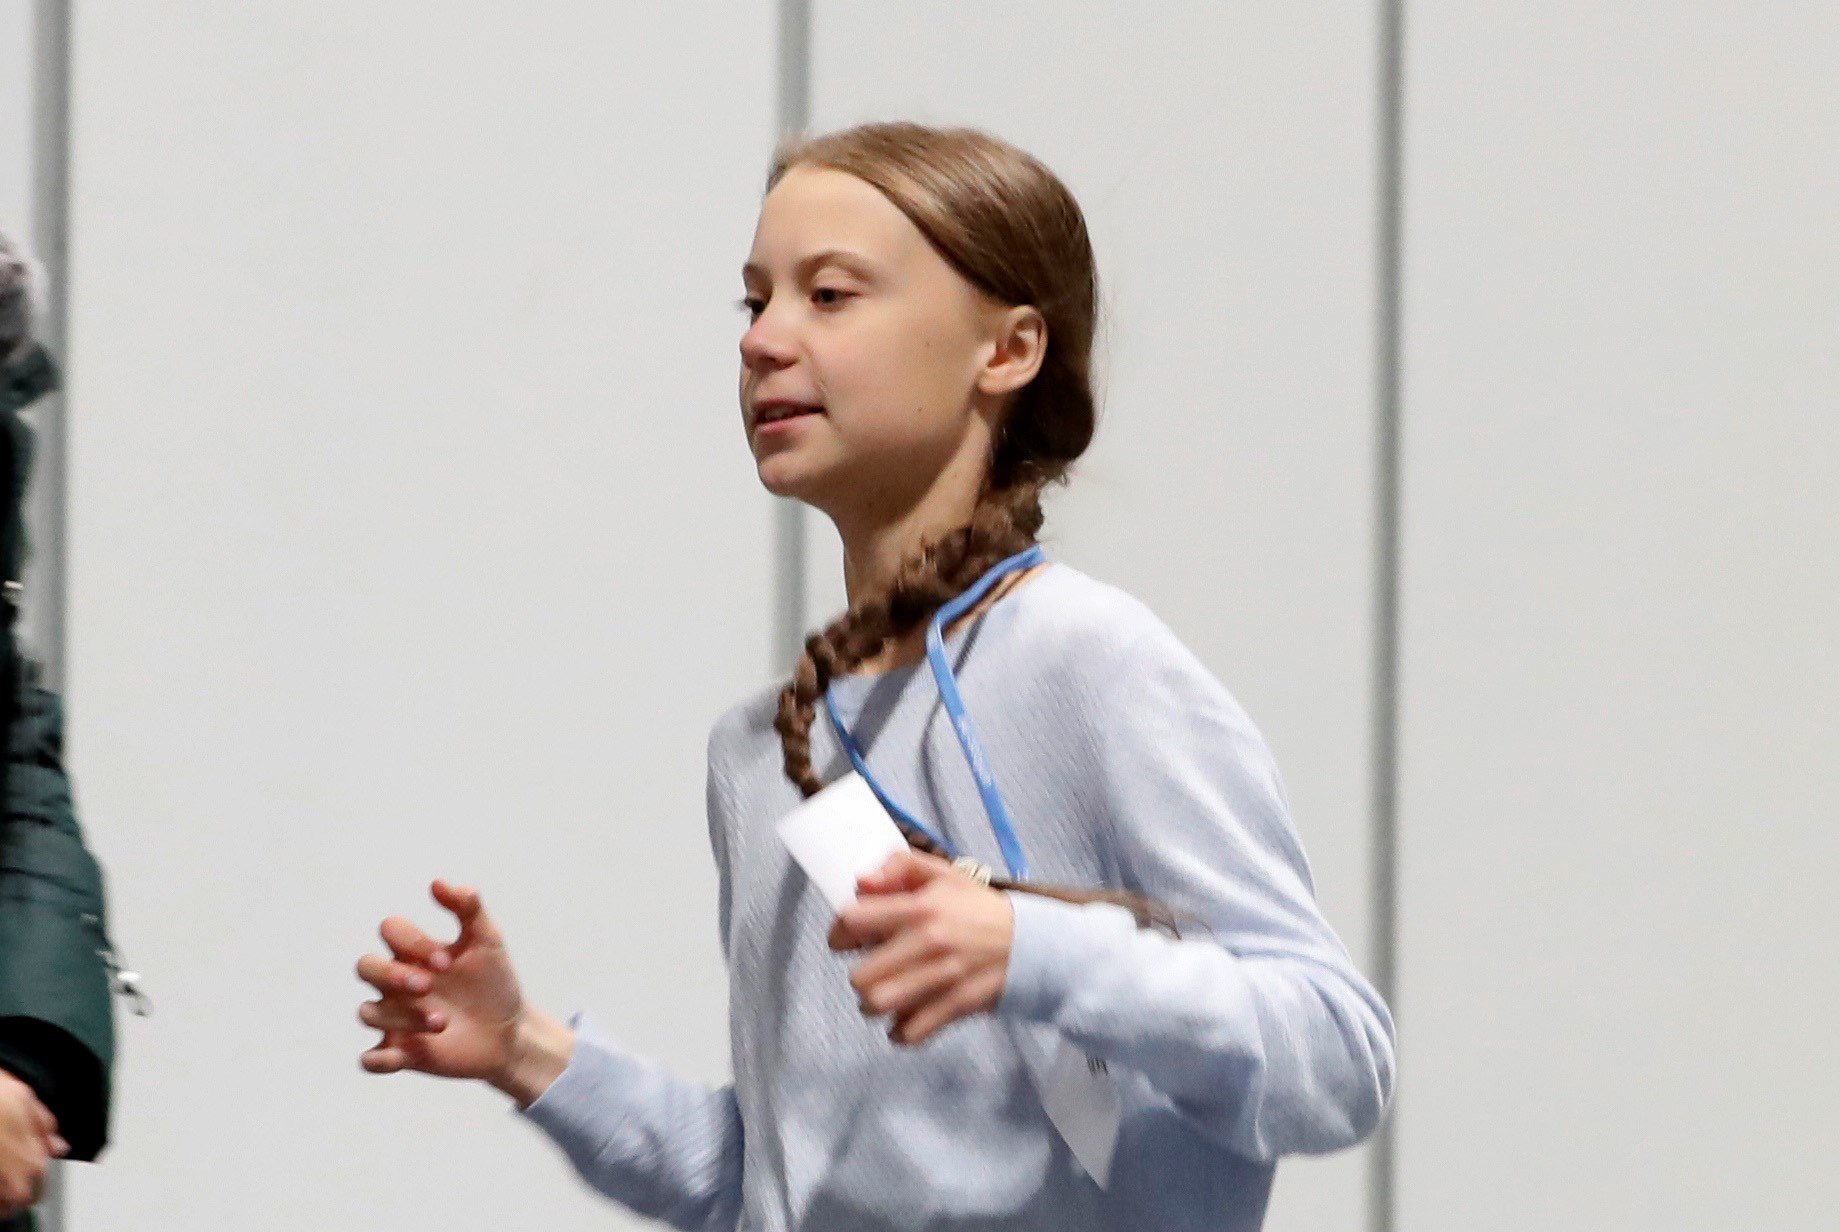 Greta Thunberg: "It's not a future problem, it's something that is already affecting us"